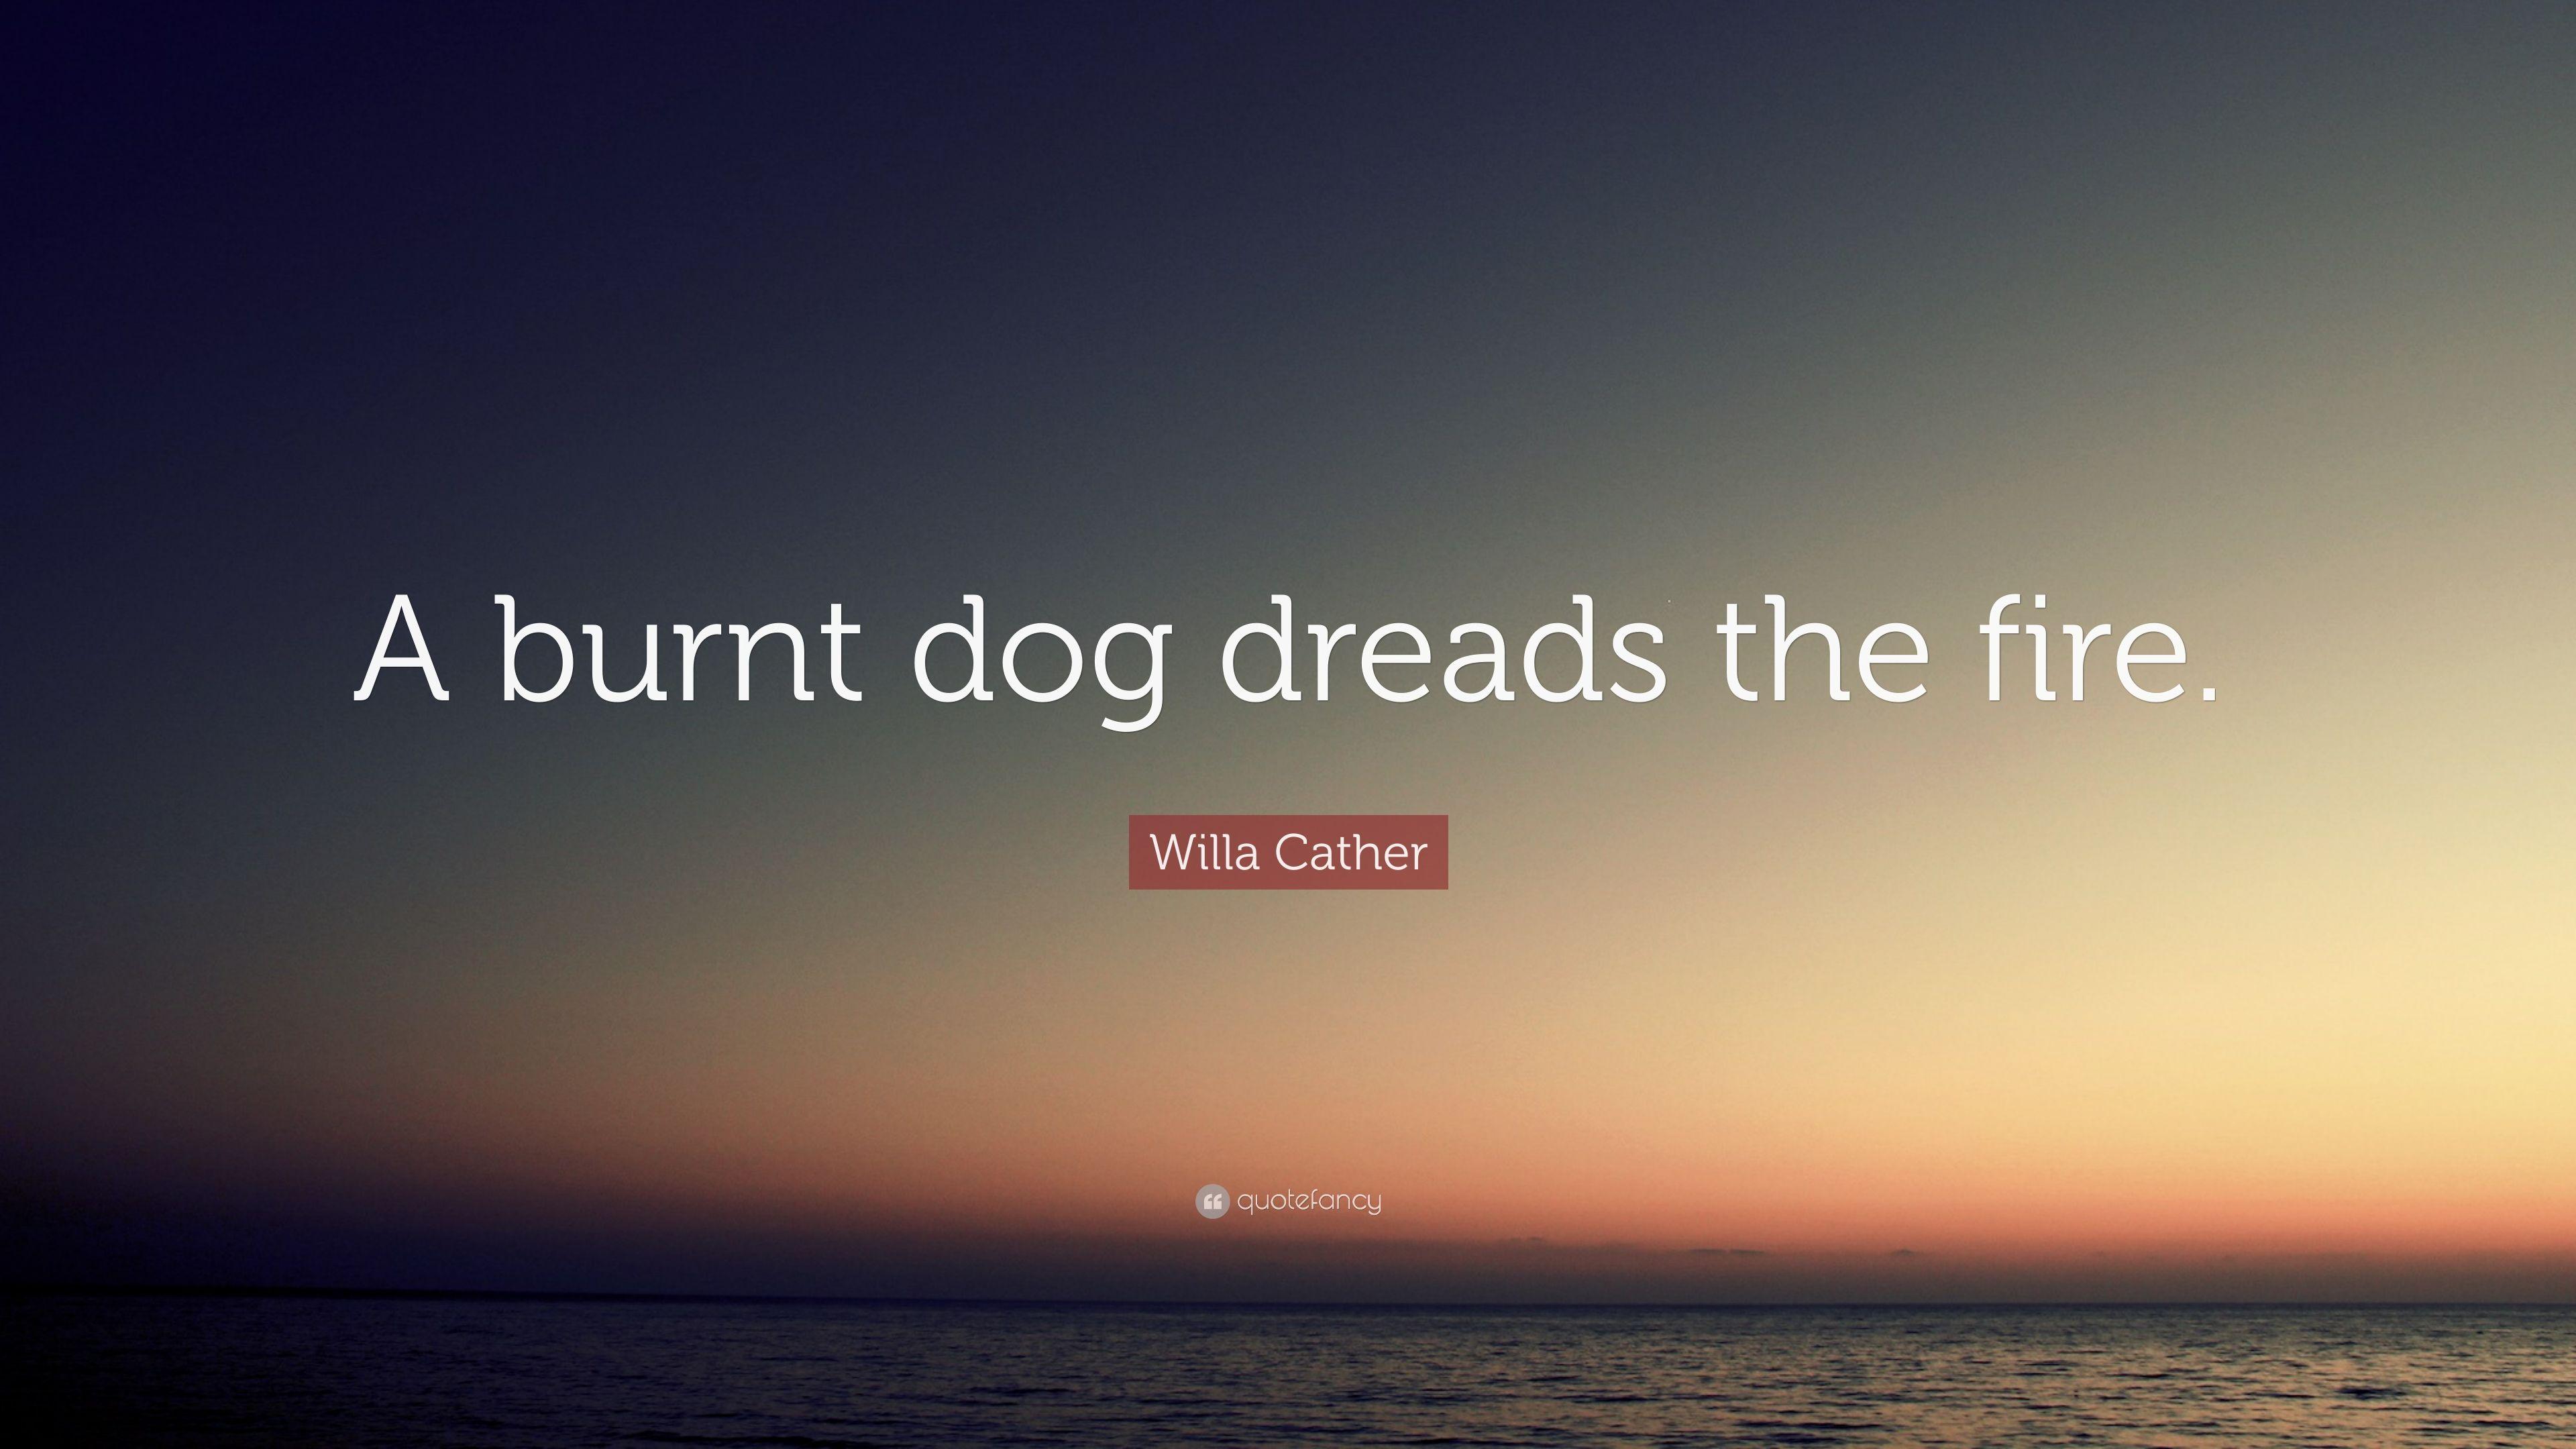 Willa Cather Quote: “A burnt dog dreads the fire.” 7 wallpaper